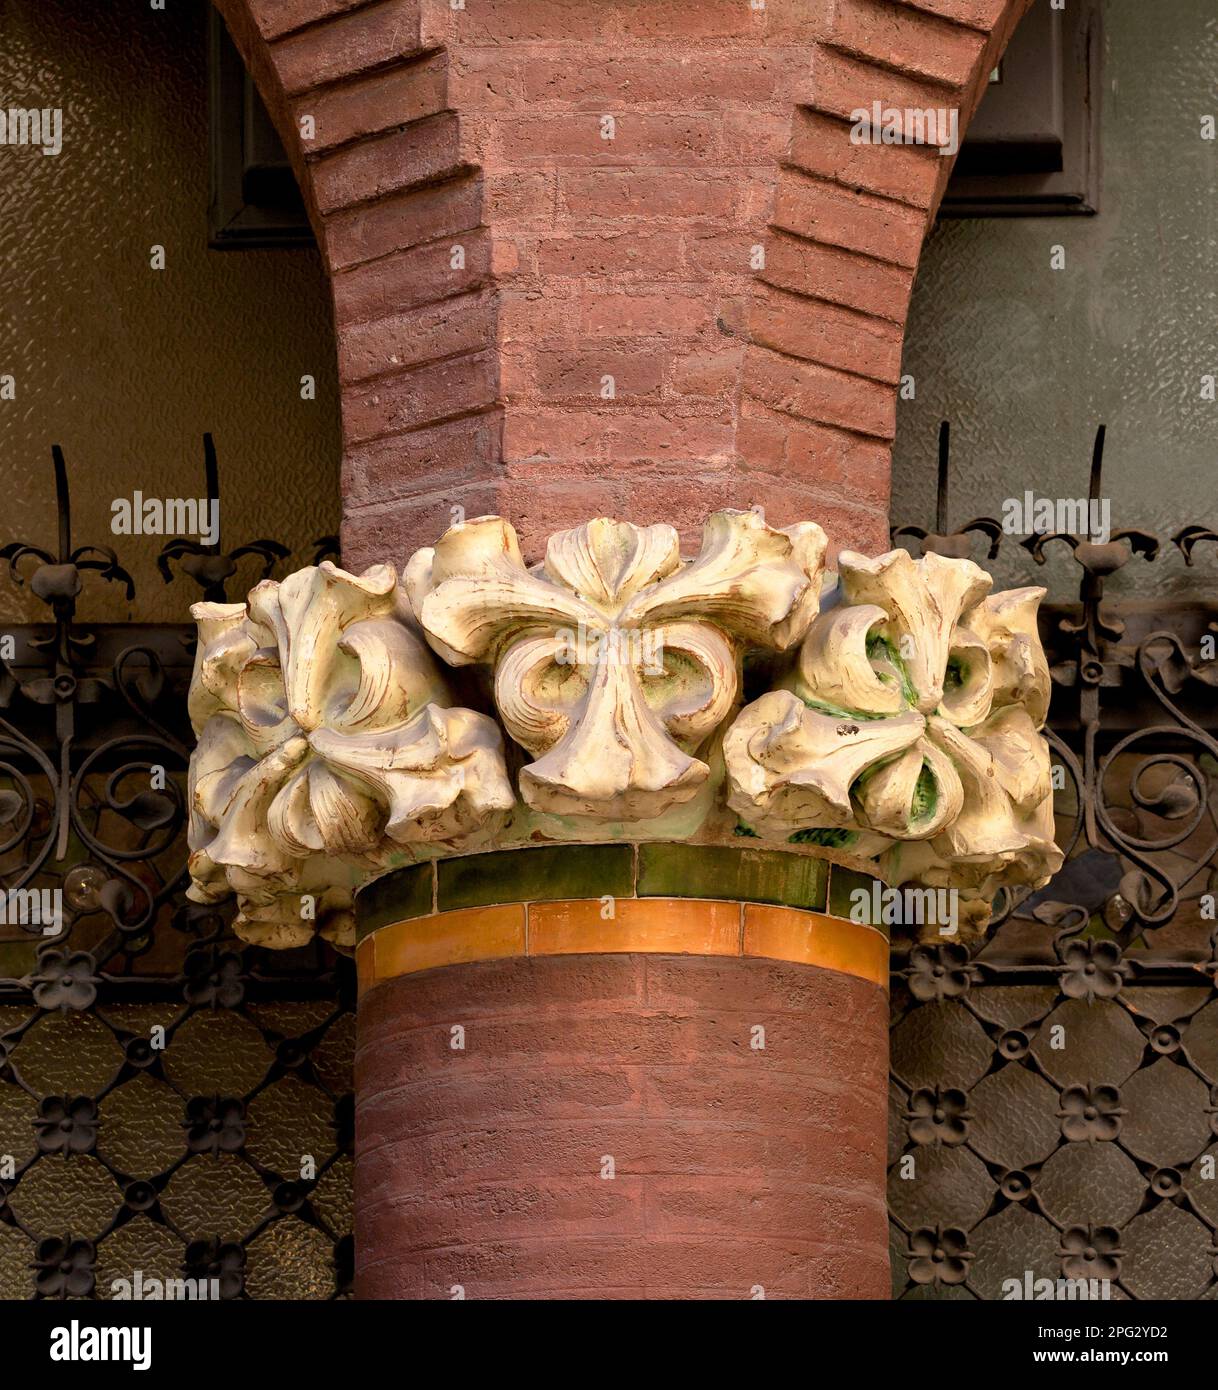 Shot in color and black and white detail on the facade of this historic building representing some character, animal or flower. Set at Barcelona Stock Photo